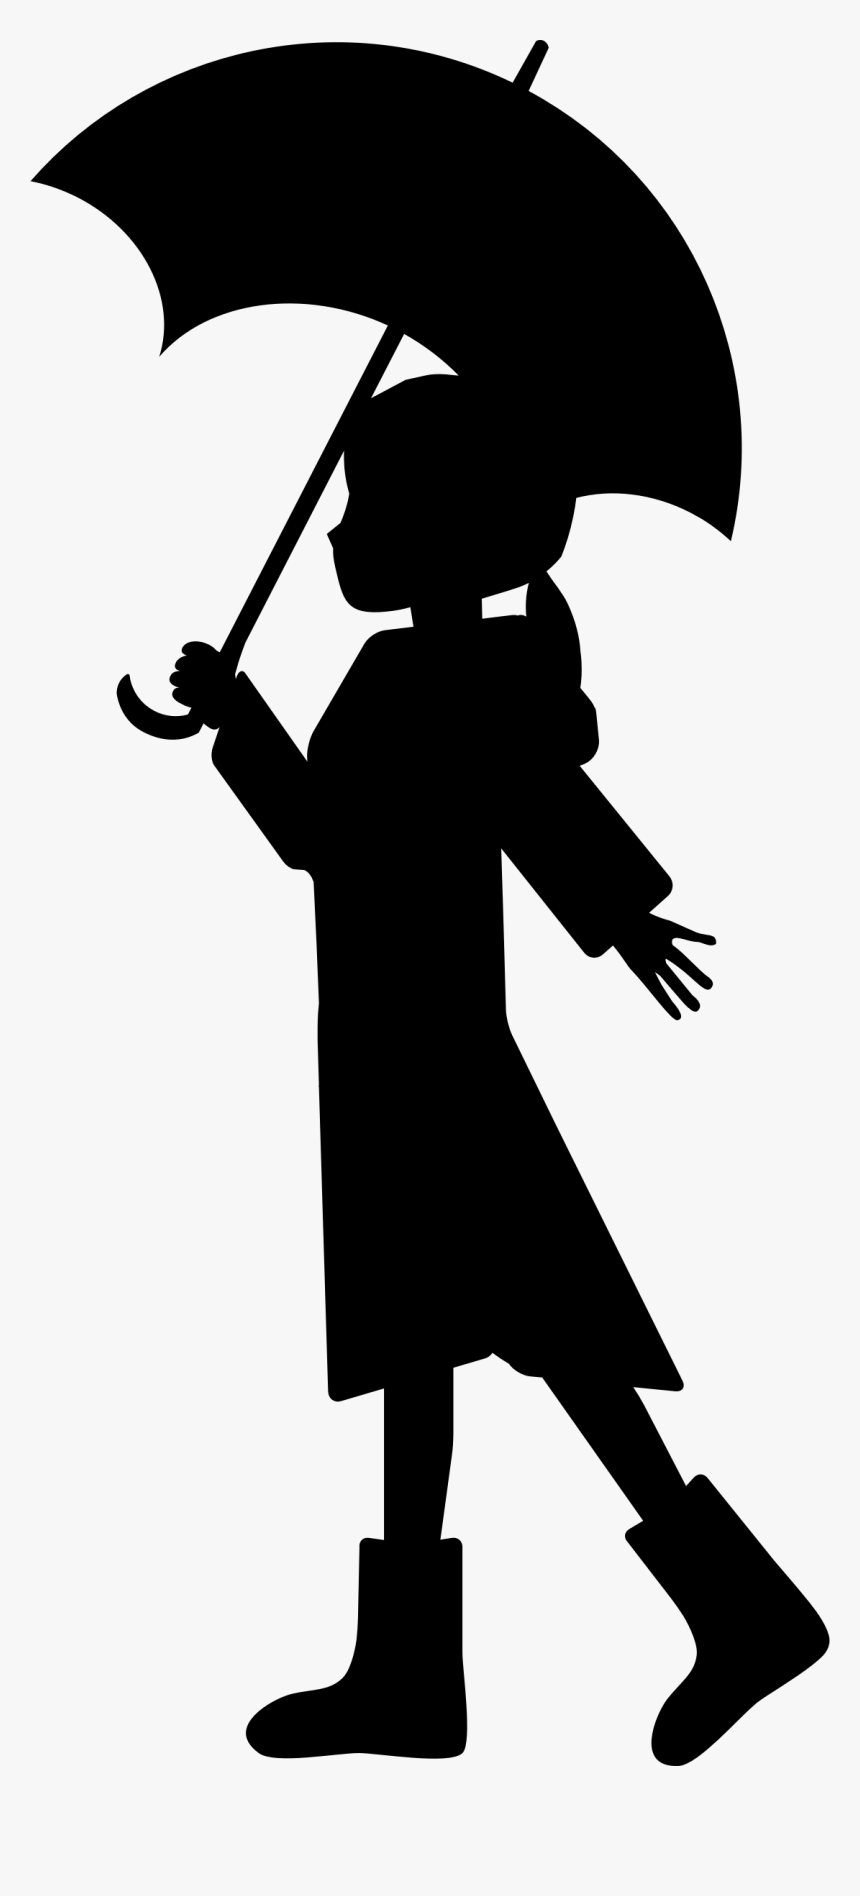 Umbrella Girl Silhouette At Getdrawings - Silhouette Girl With Umbrella, HD Png Download, Free Download